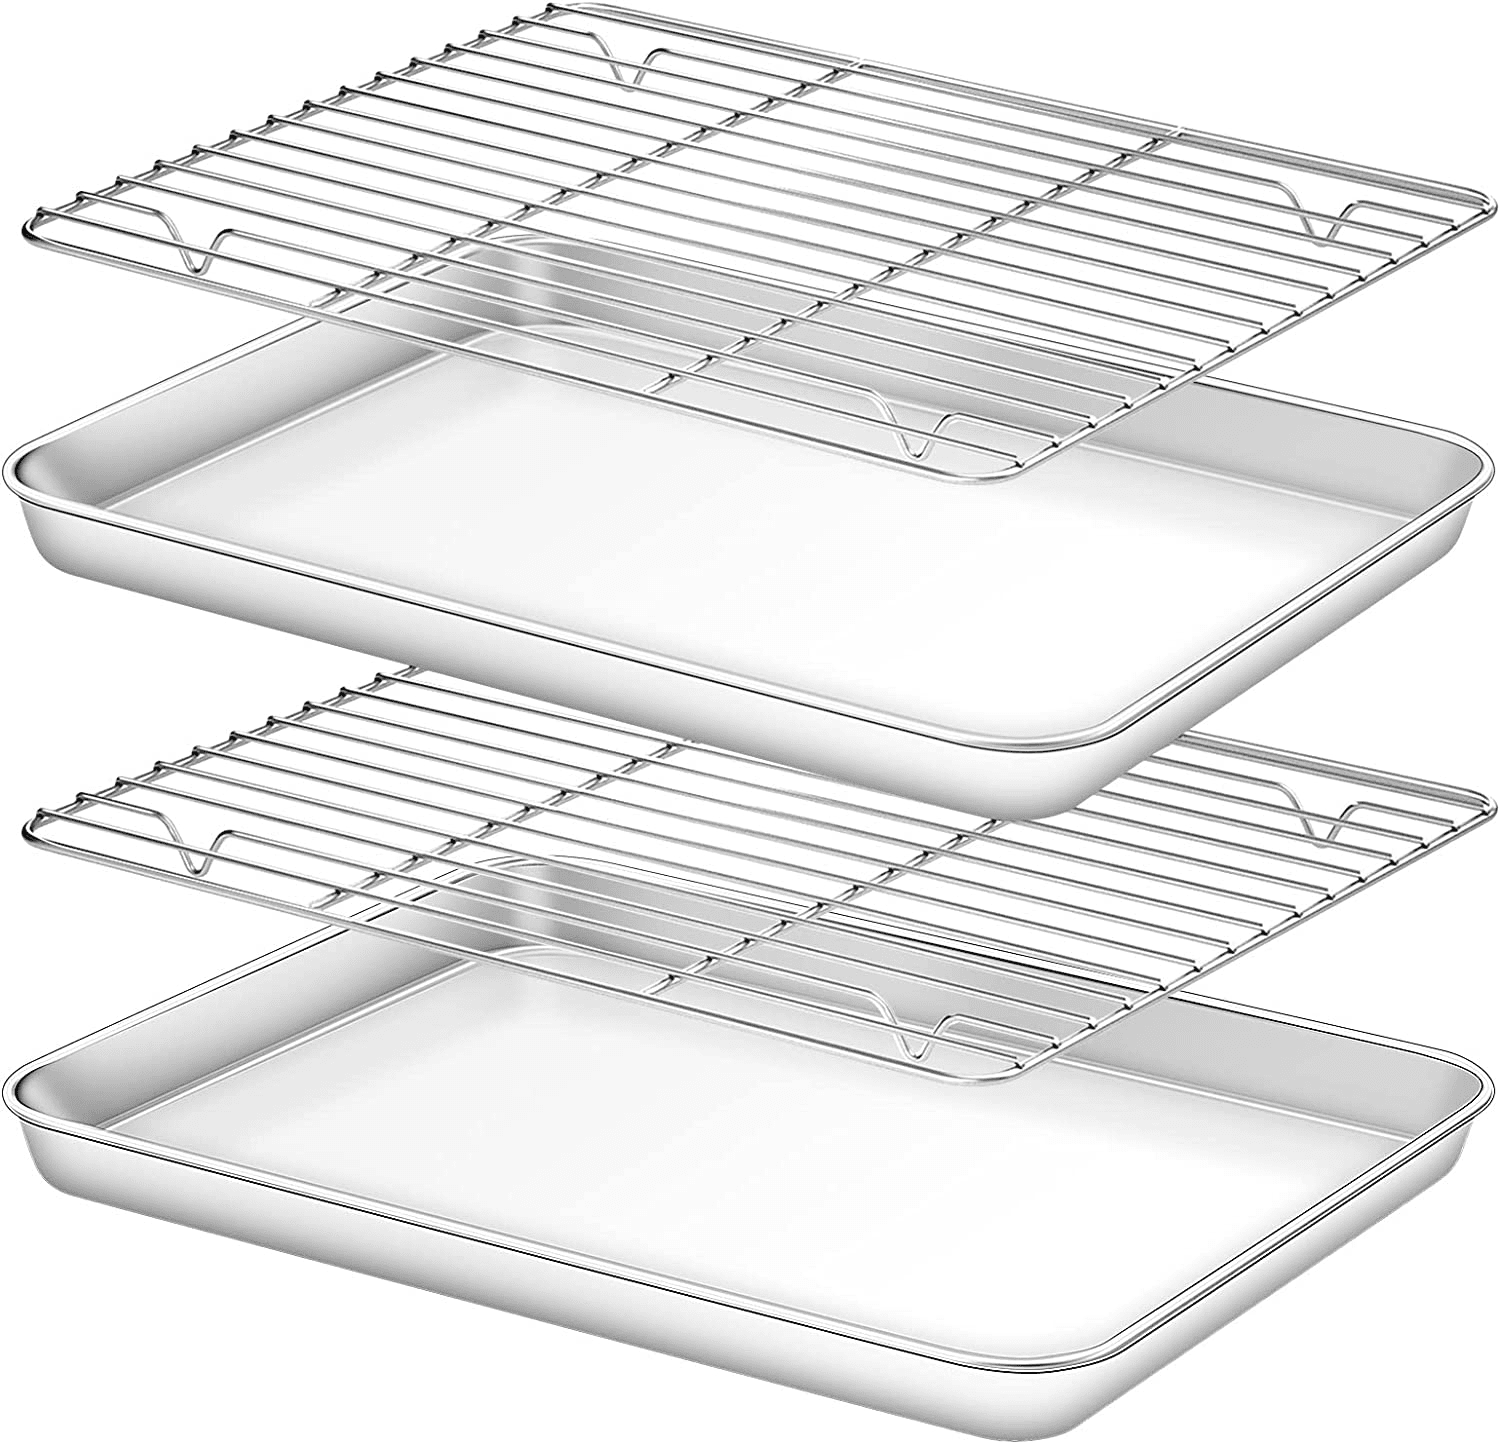 Baking Sheet Tray with Cooling Rack Set (2 Pans + 2 Racks), Stainless Steel  Cookie Pan with Cooling Rack For Oven, Nonstick Baking Pan, Warp Resistant